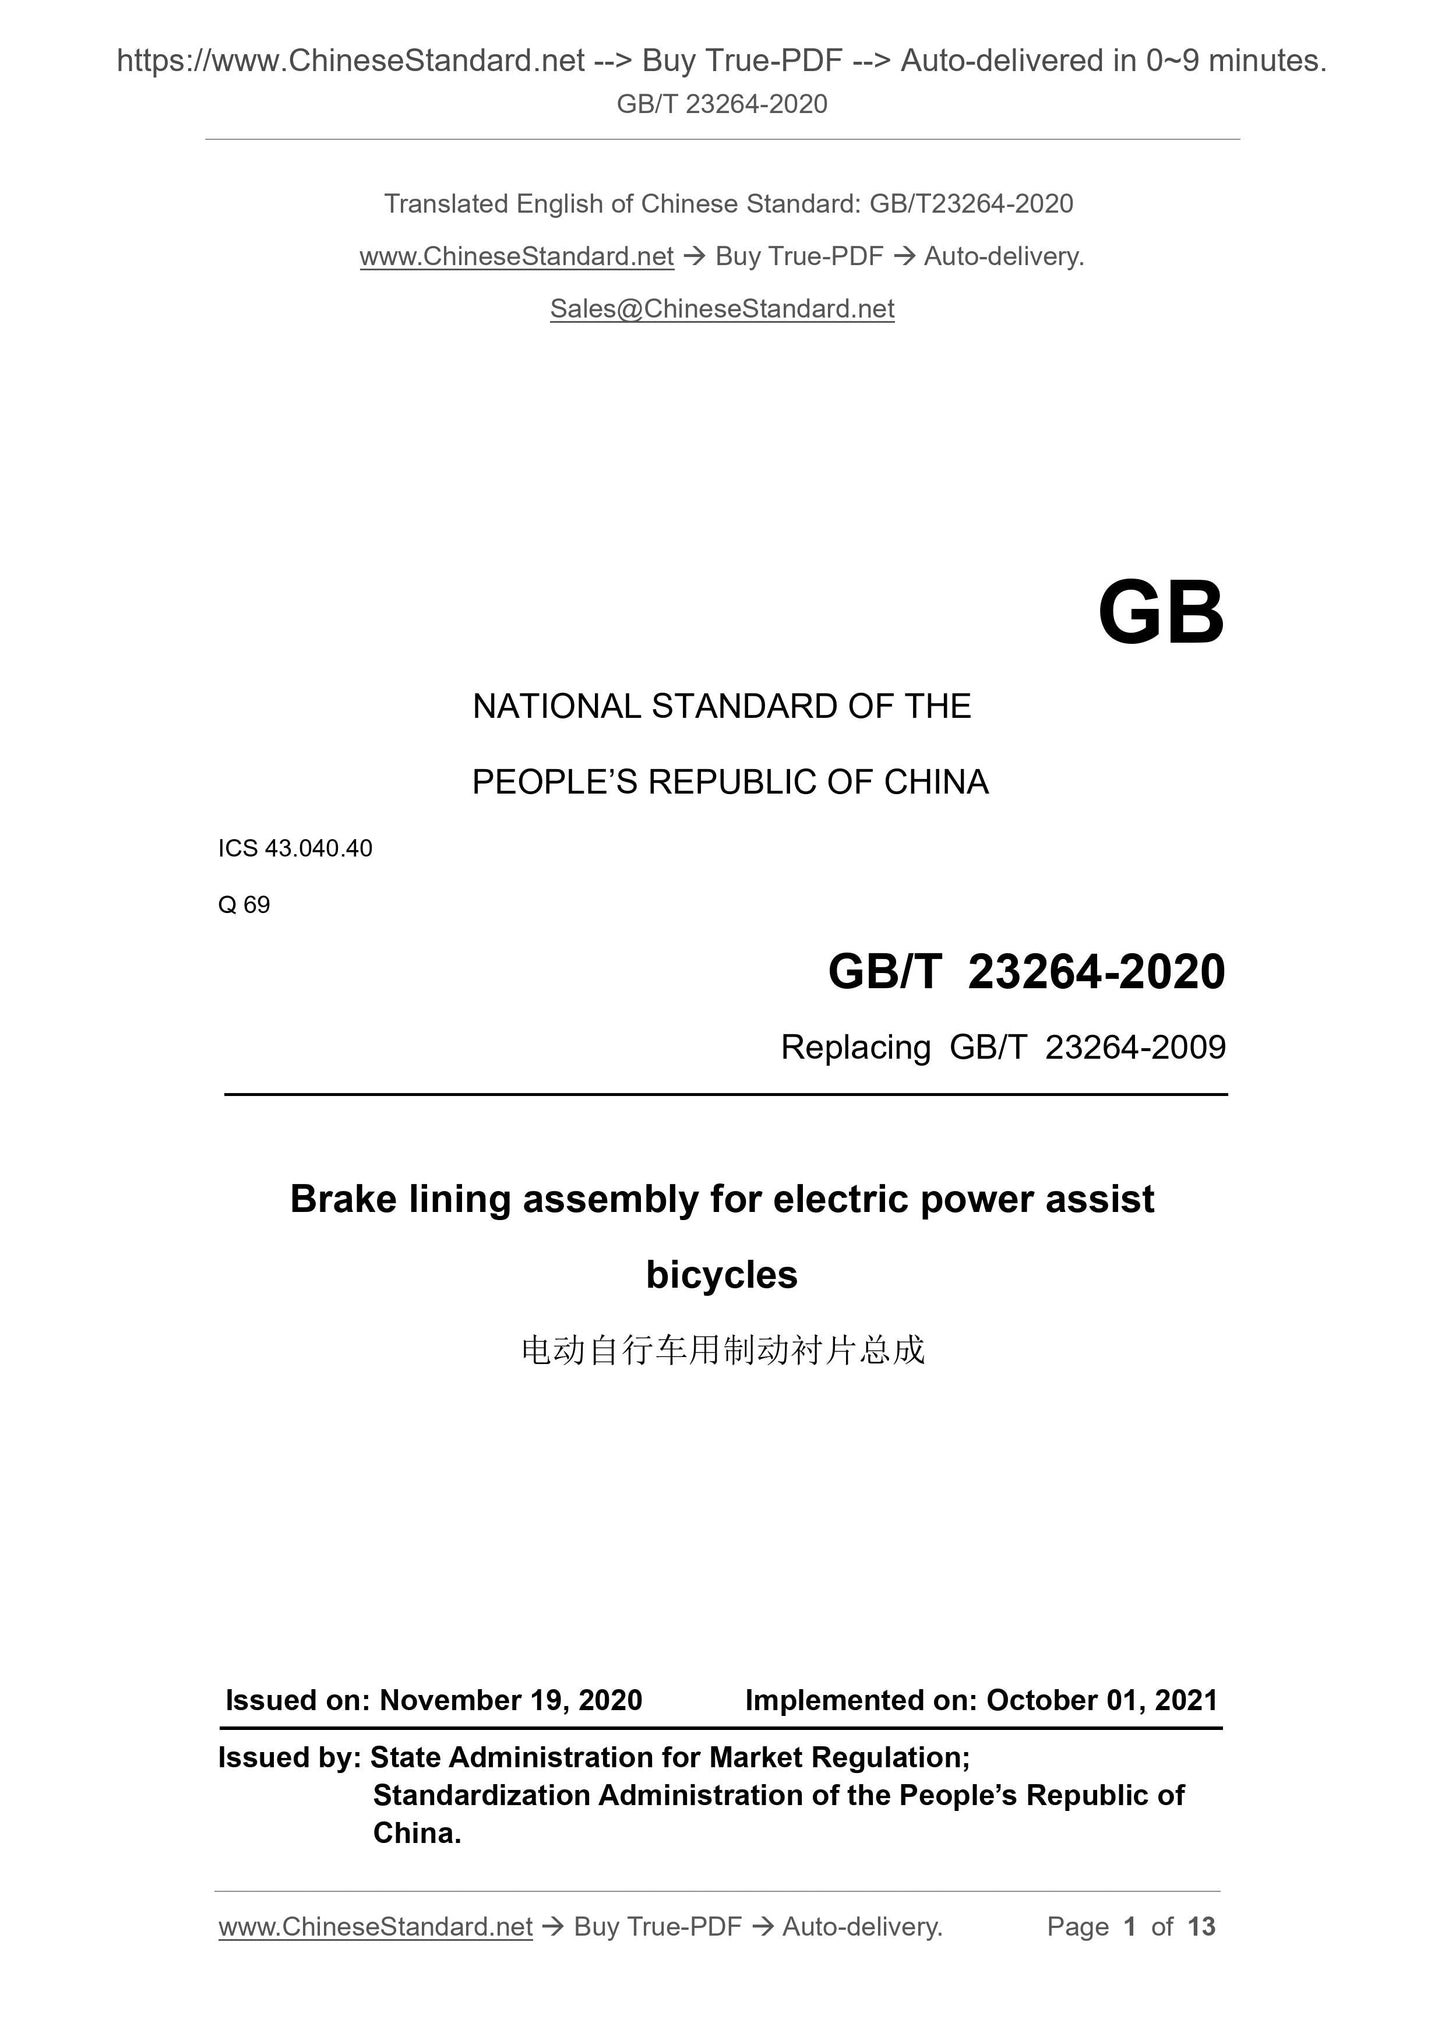 GB/T 23264-2020 Page 1